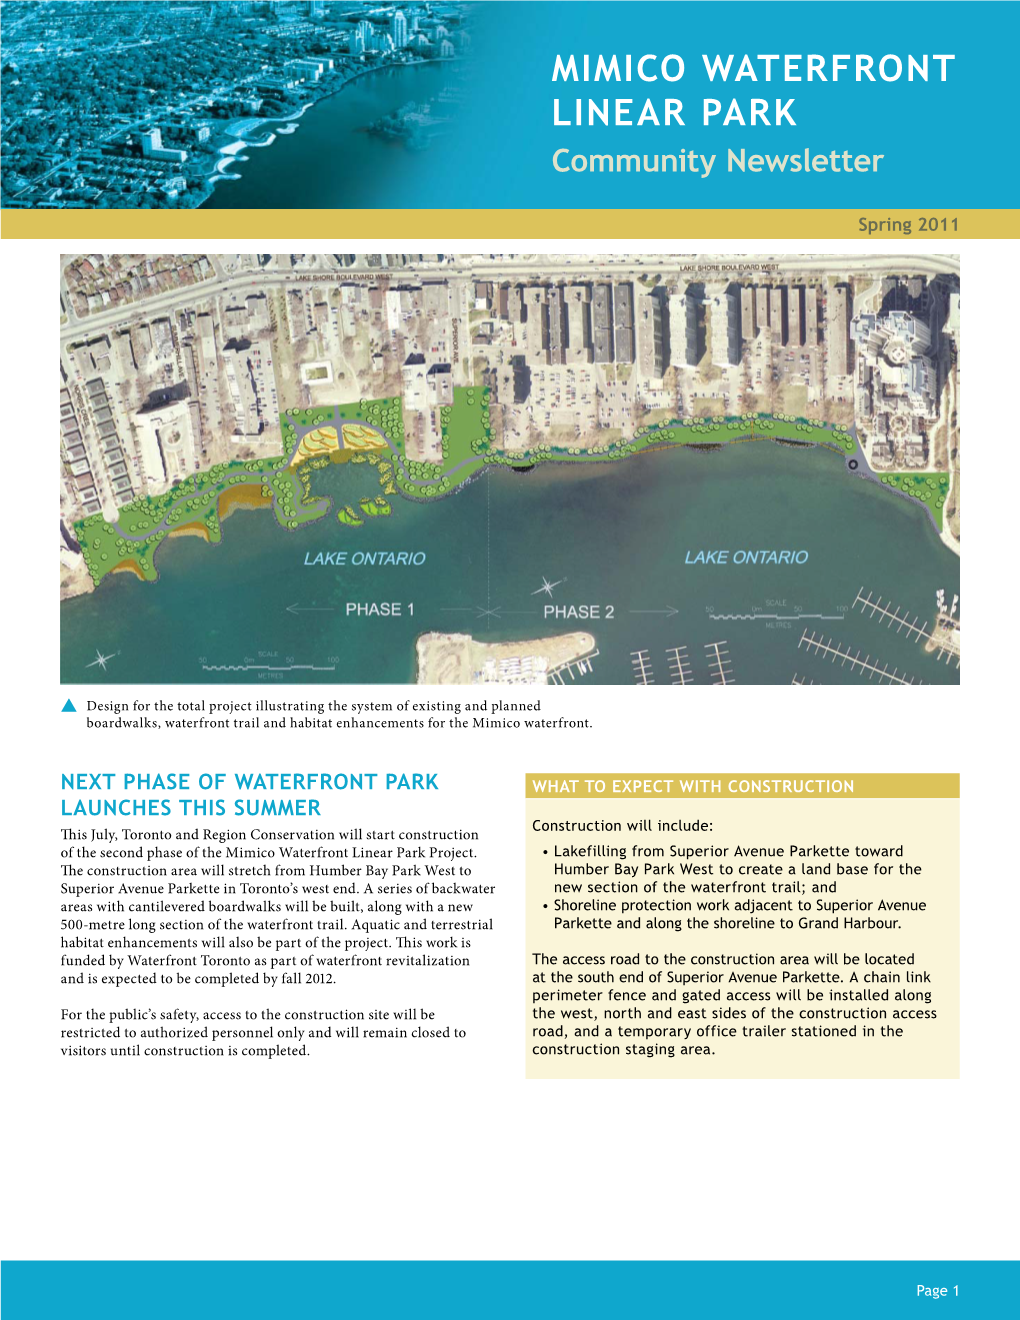 MIMICO WATERFRONT LINEAR PARK Community Newsletter